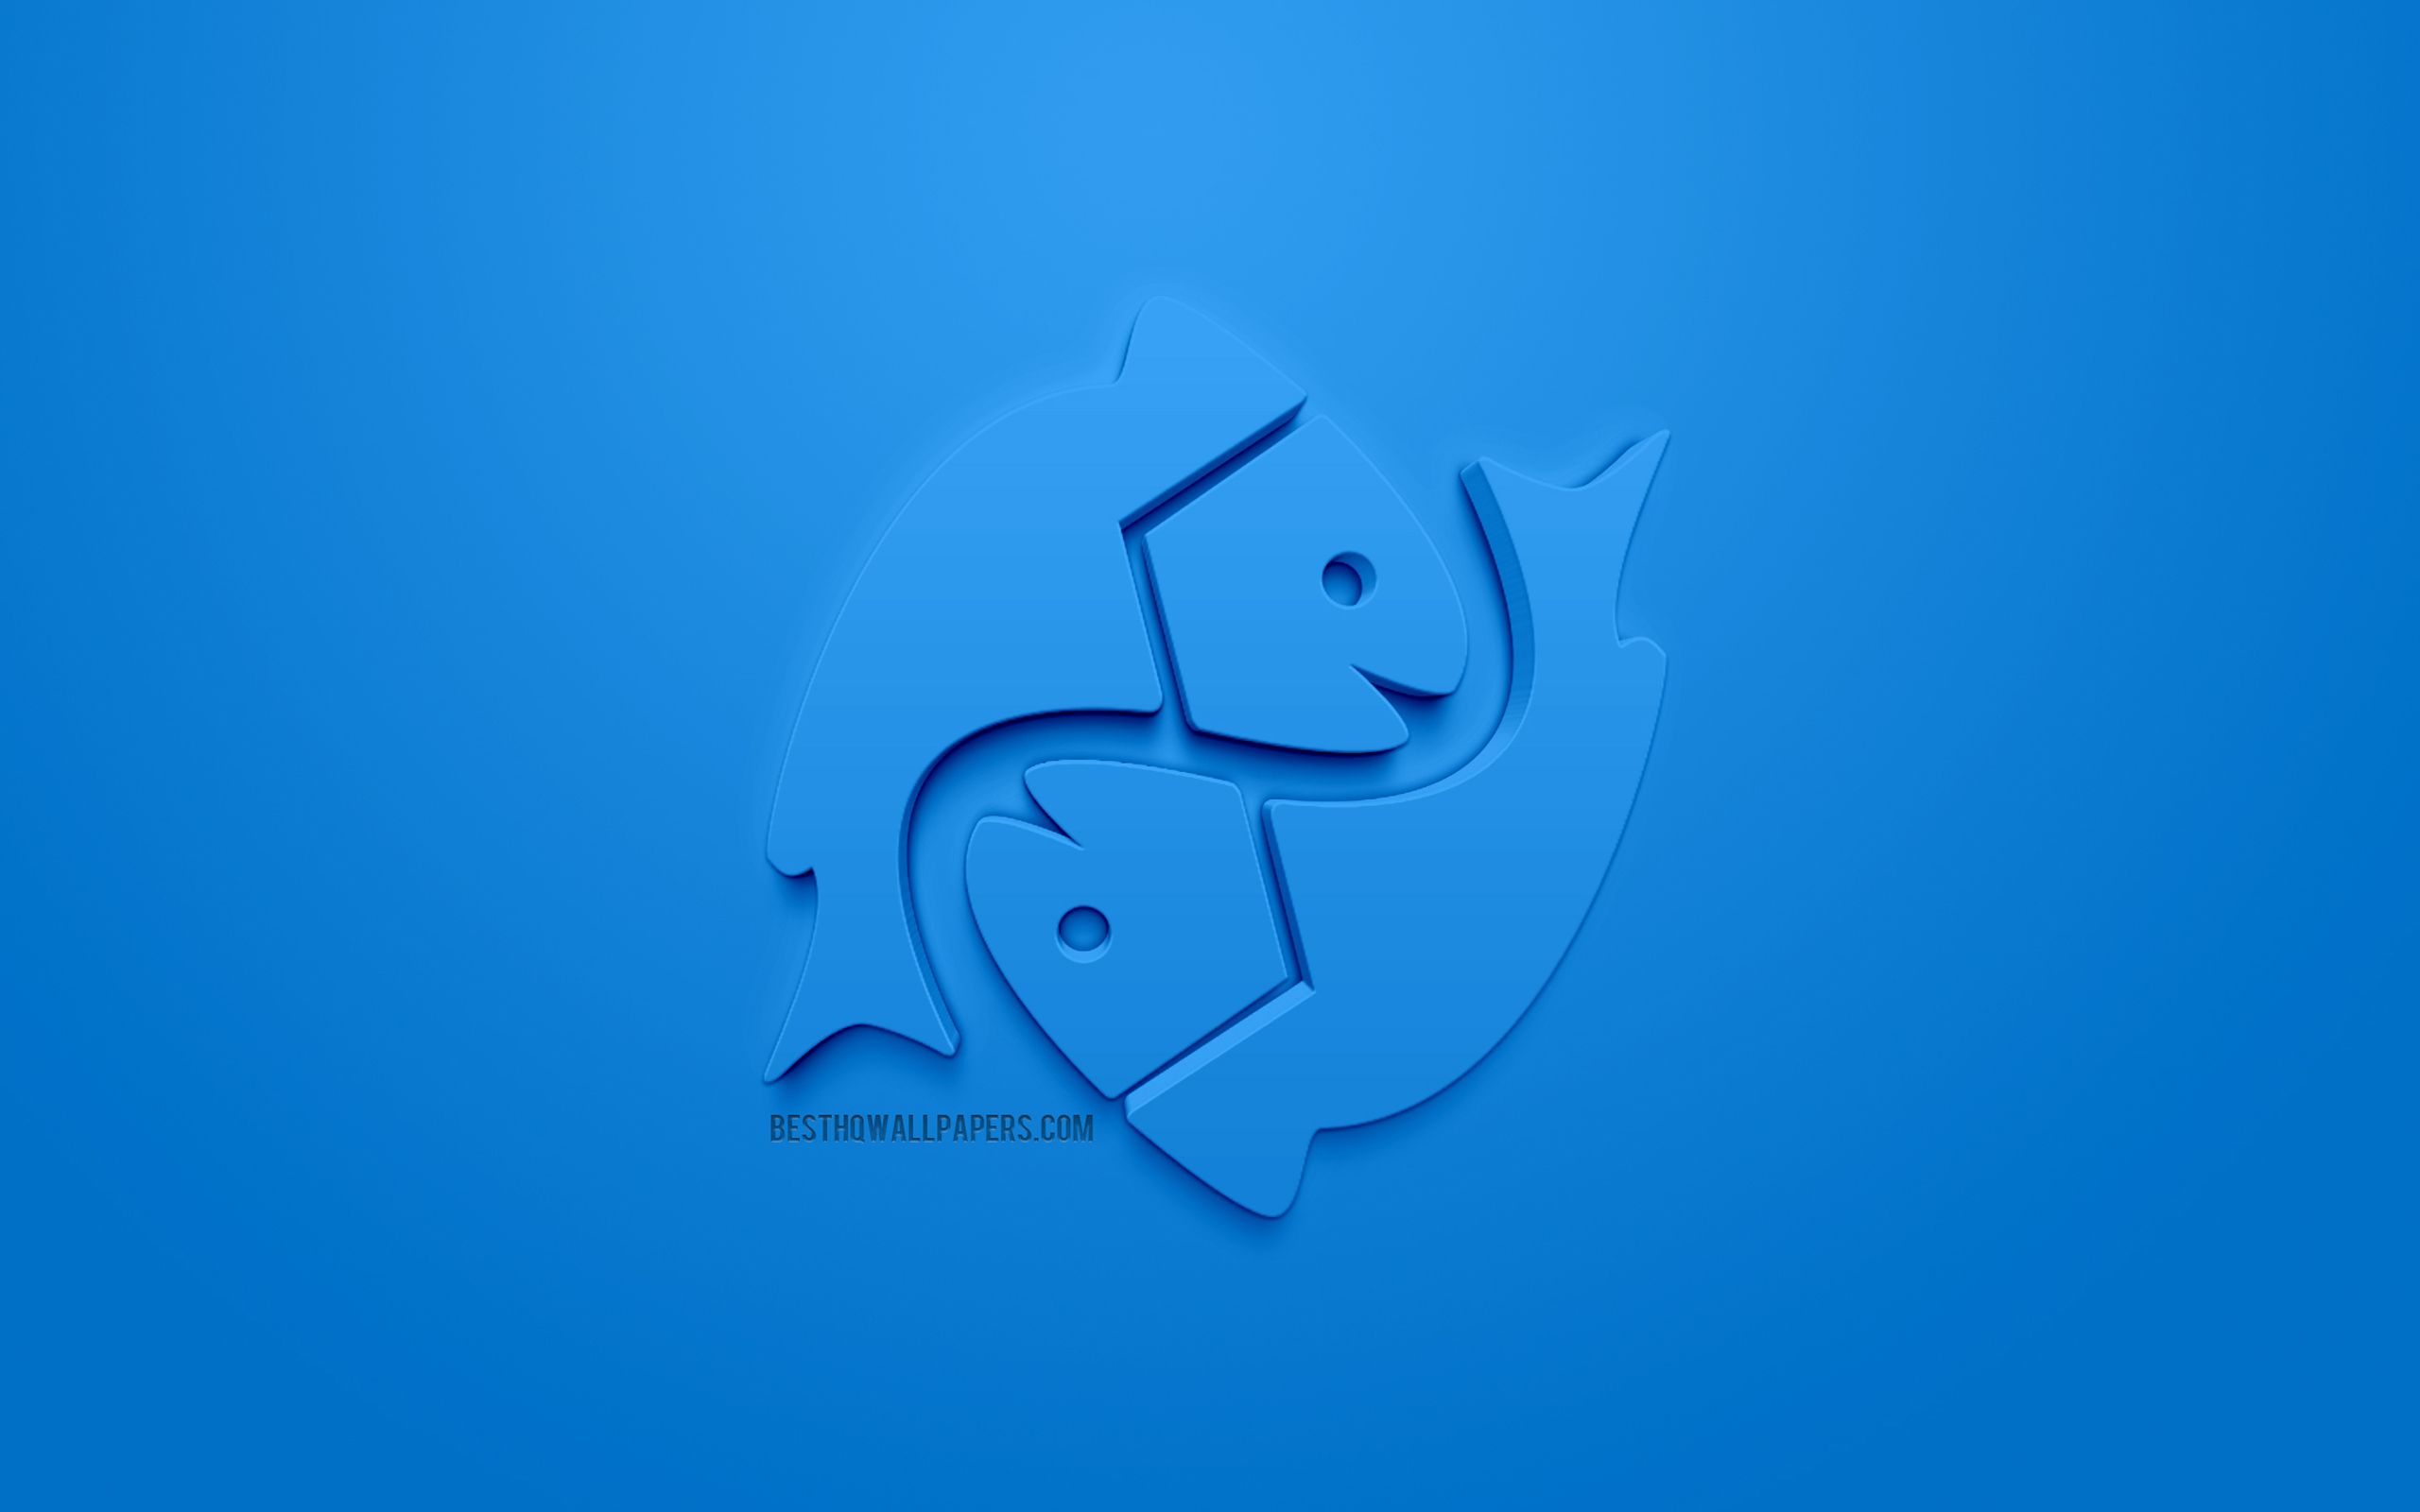 Download wallpaper Pisces zodiac sign, Water sign, Pisces Horoscope sign, 3D zodiac signs, astrology, Pisces, 3D astrological sign, blue background, creative 3D art for desktop with resolution 2560x1600. High Quality HD picture